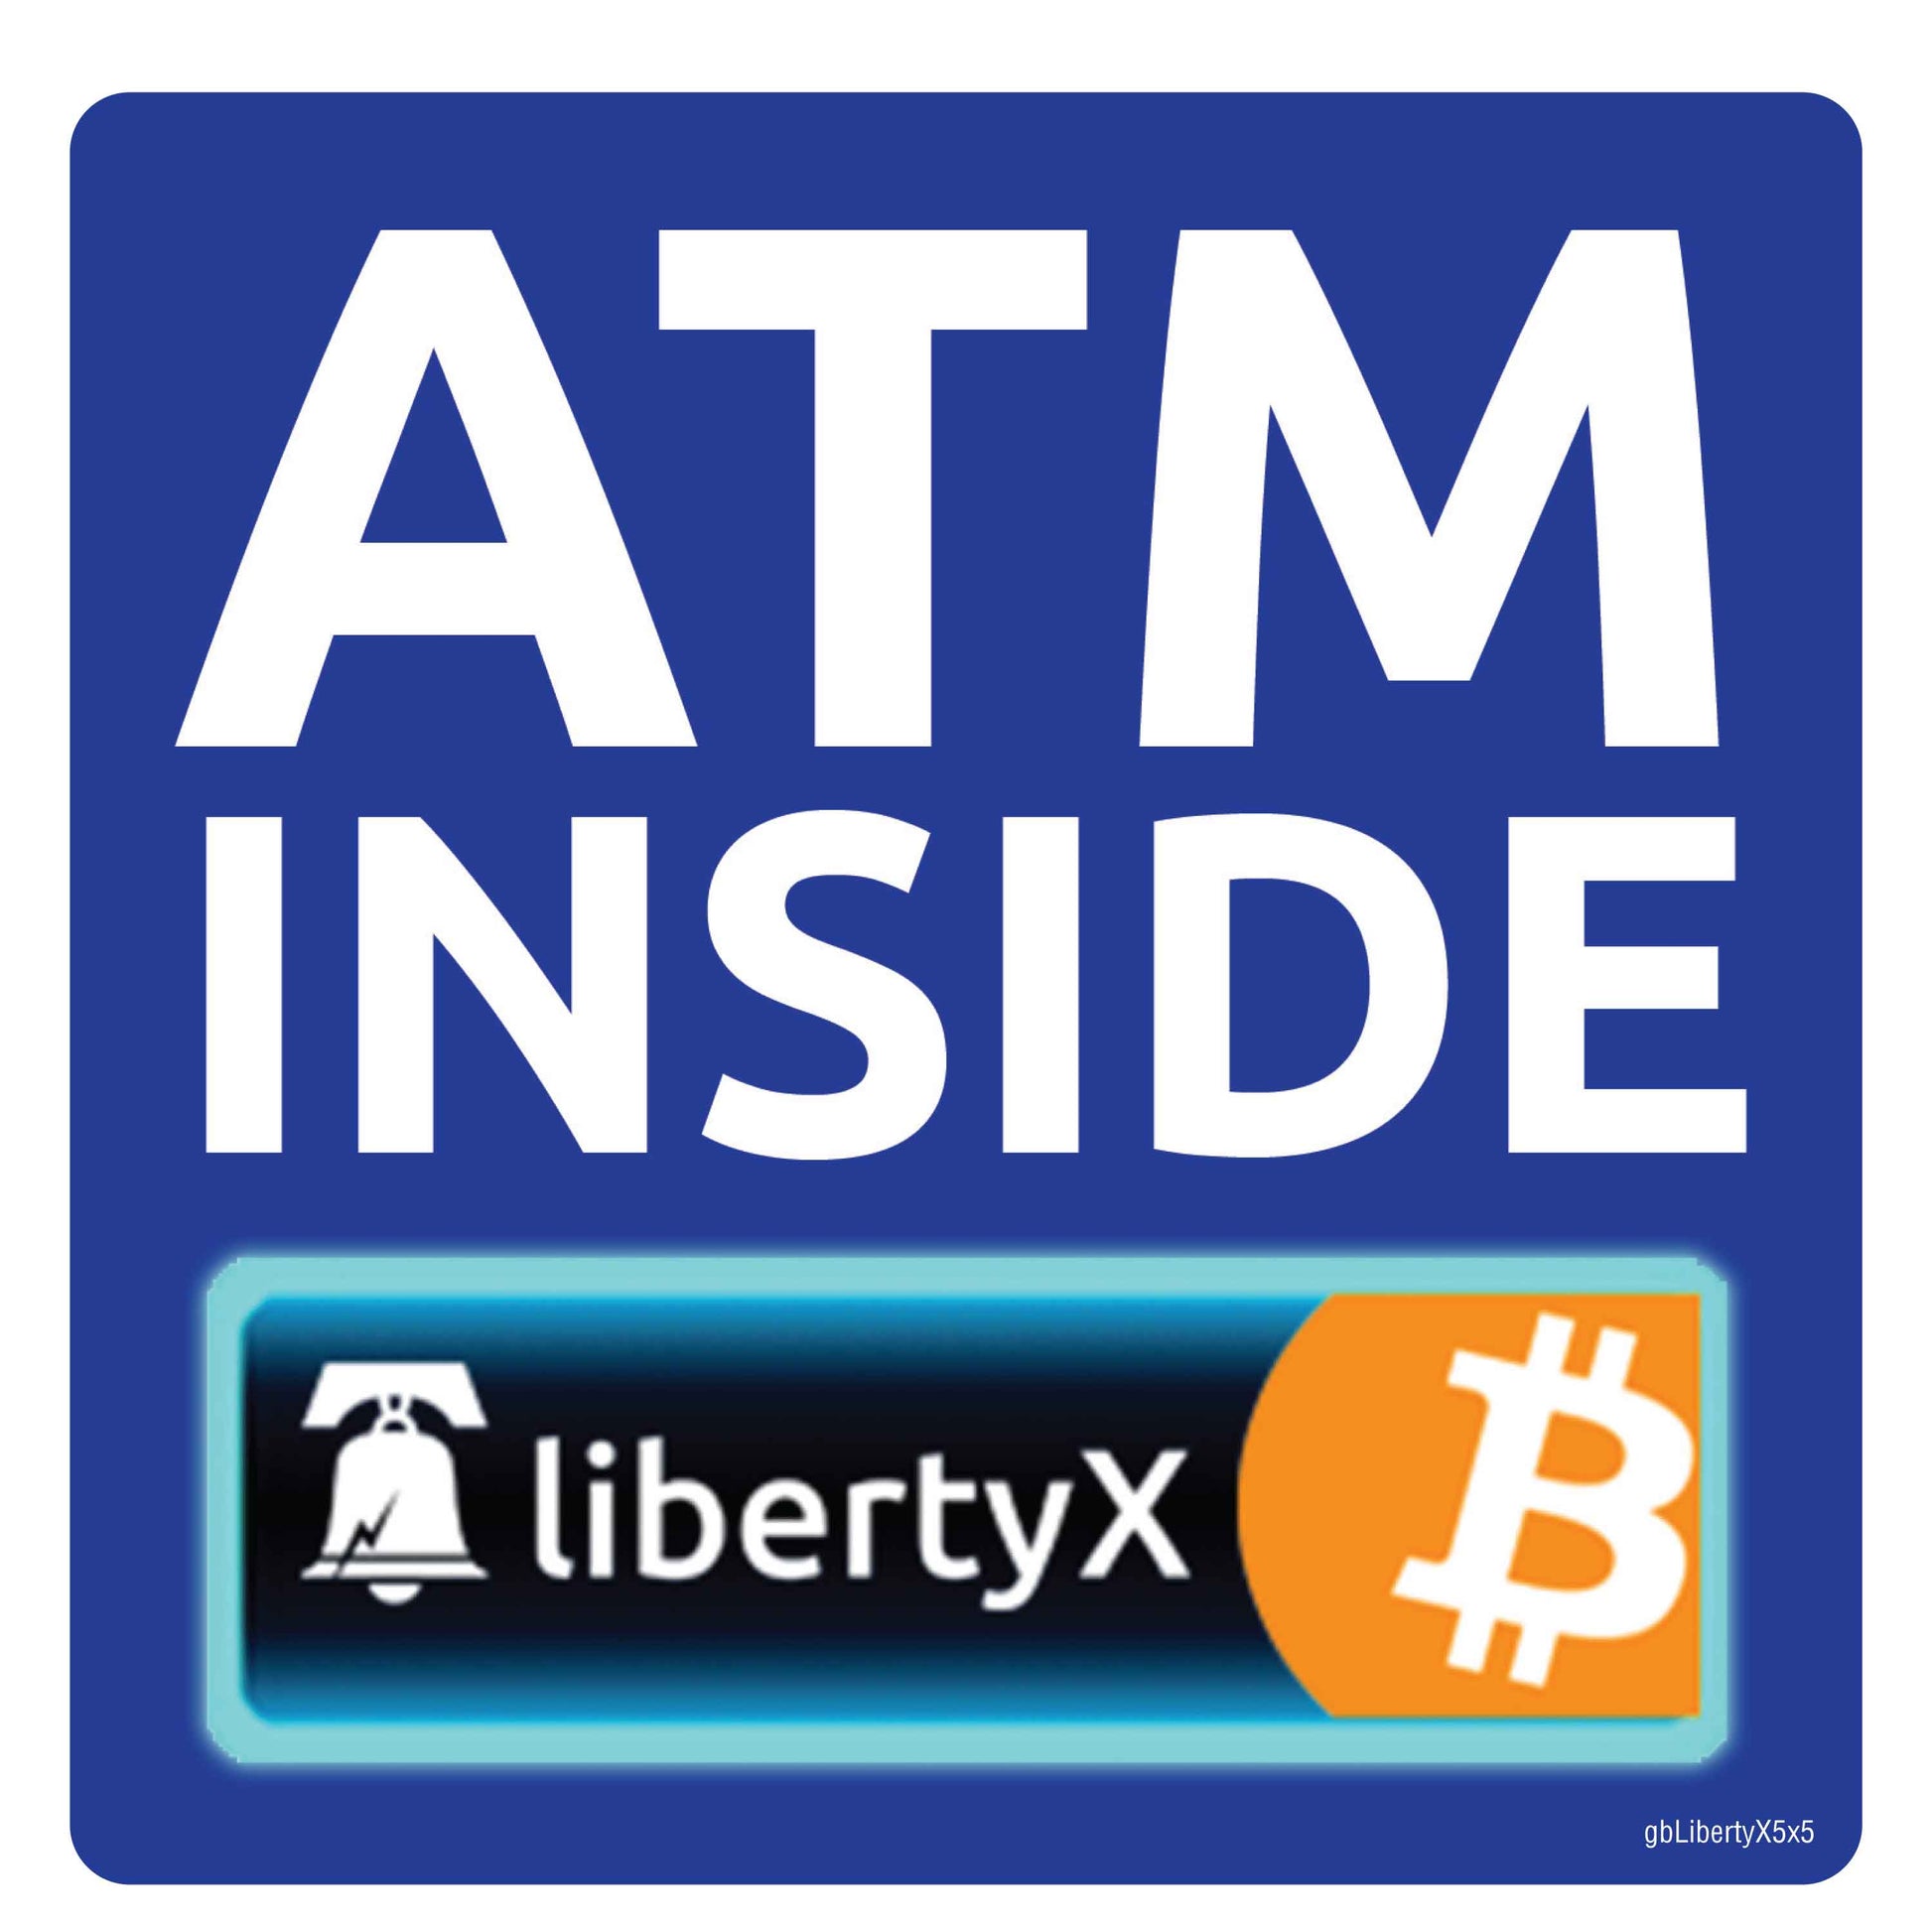 LibertyX Bitcoin ATM Inside Decal. 5 inches by 5 inches in size.